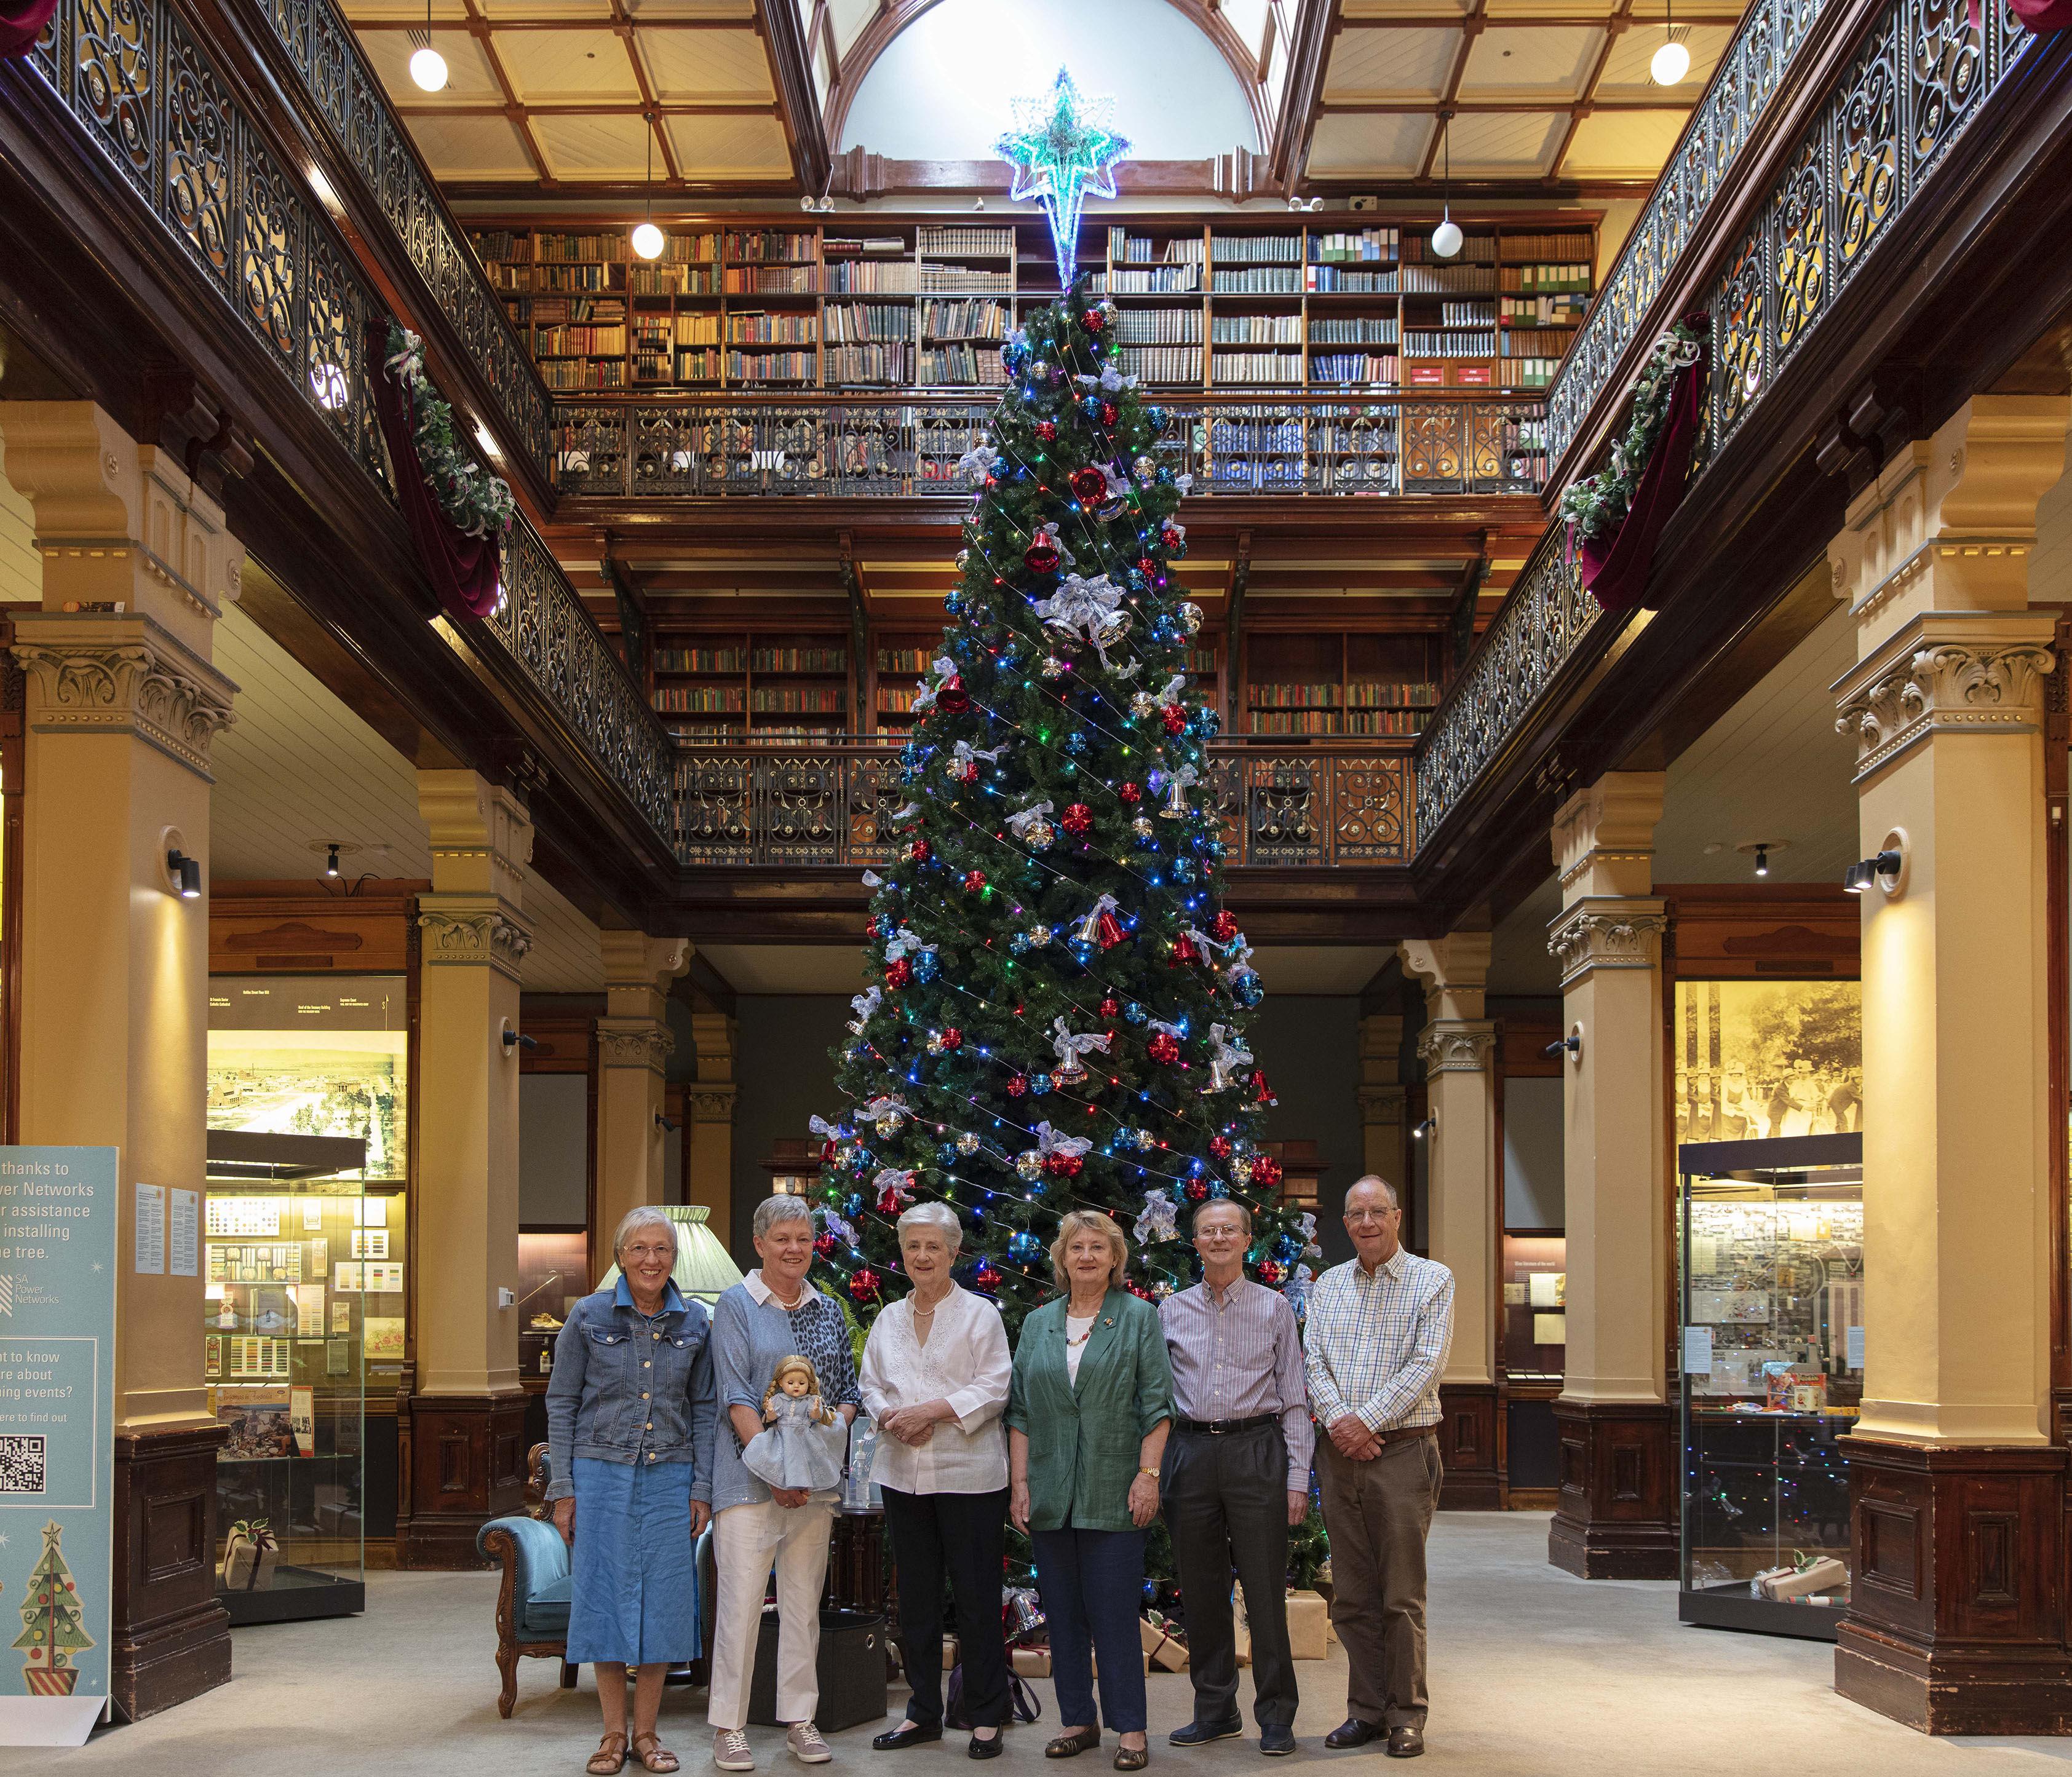 Six people standing in front of a large Christmas tree in the Mortlock Chamber.